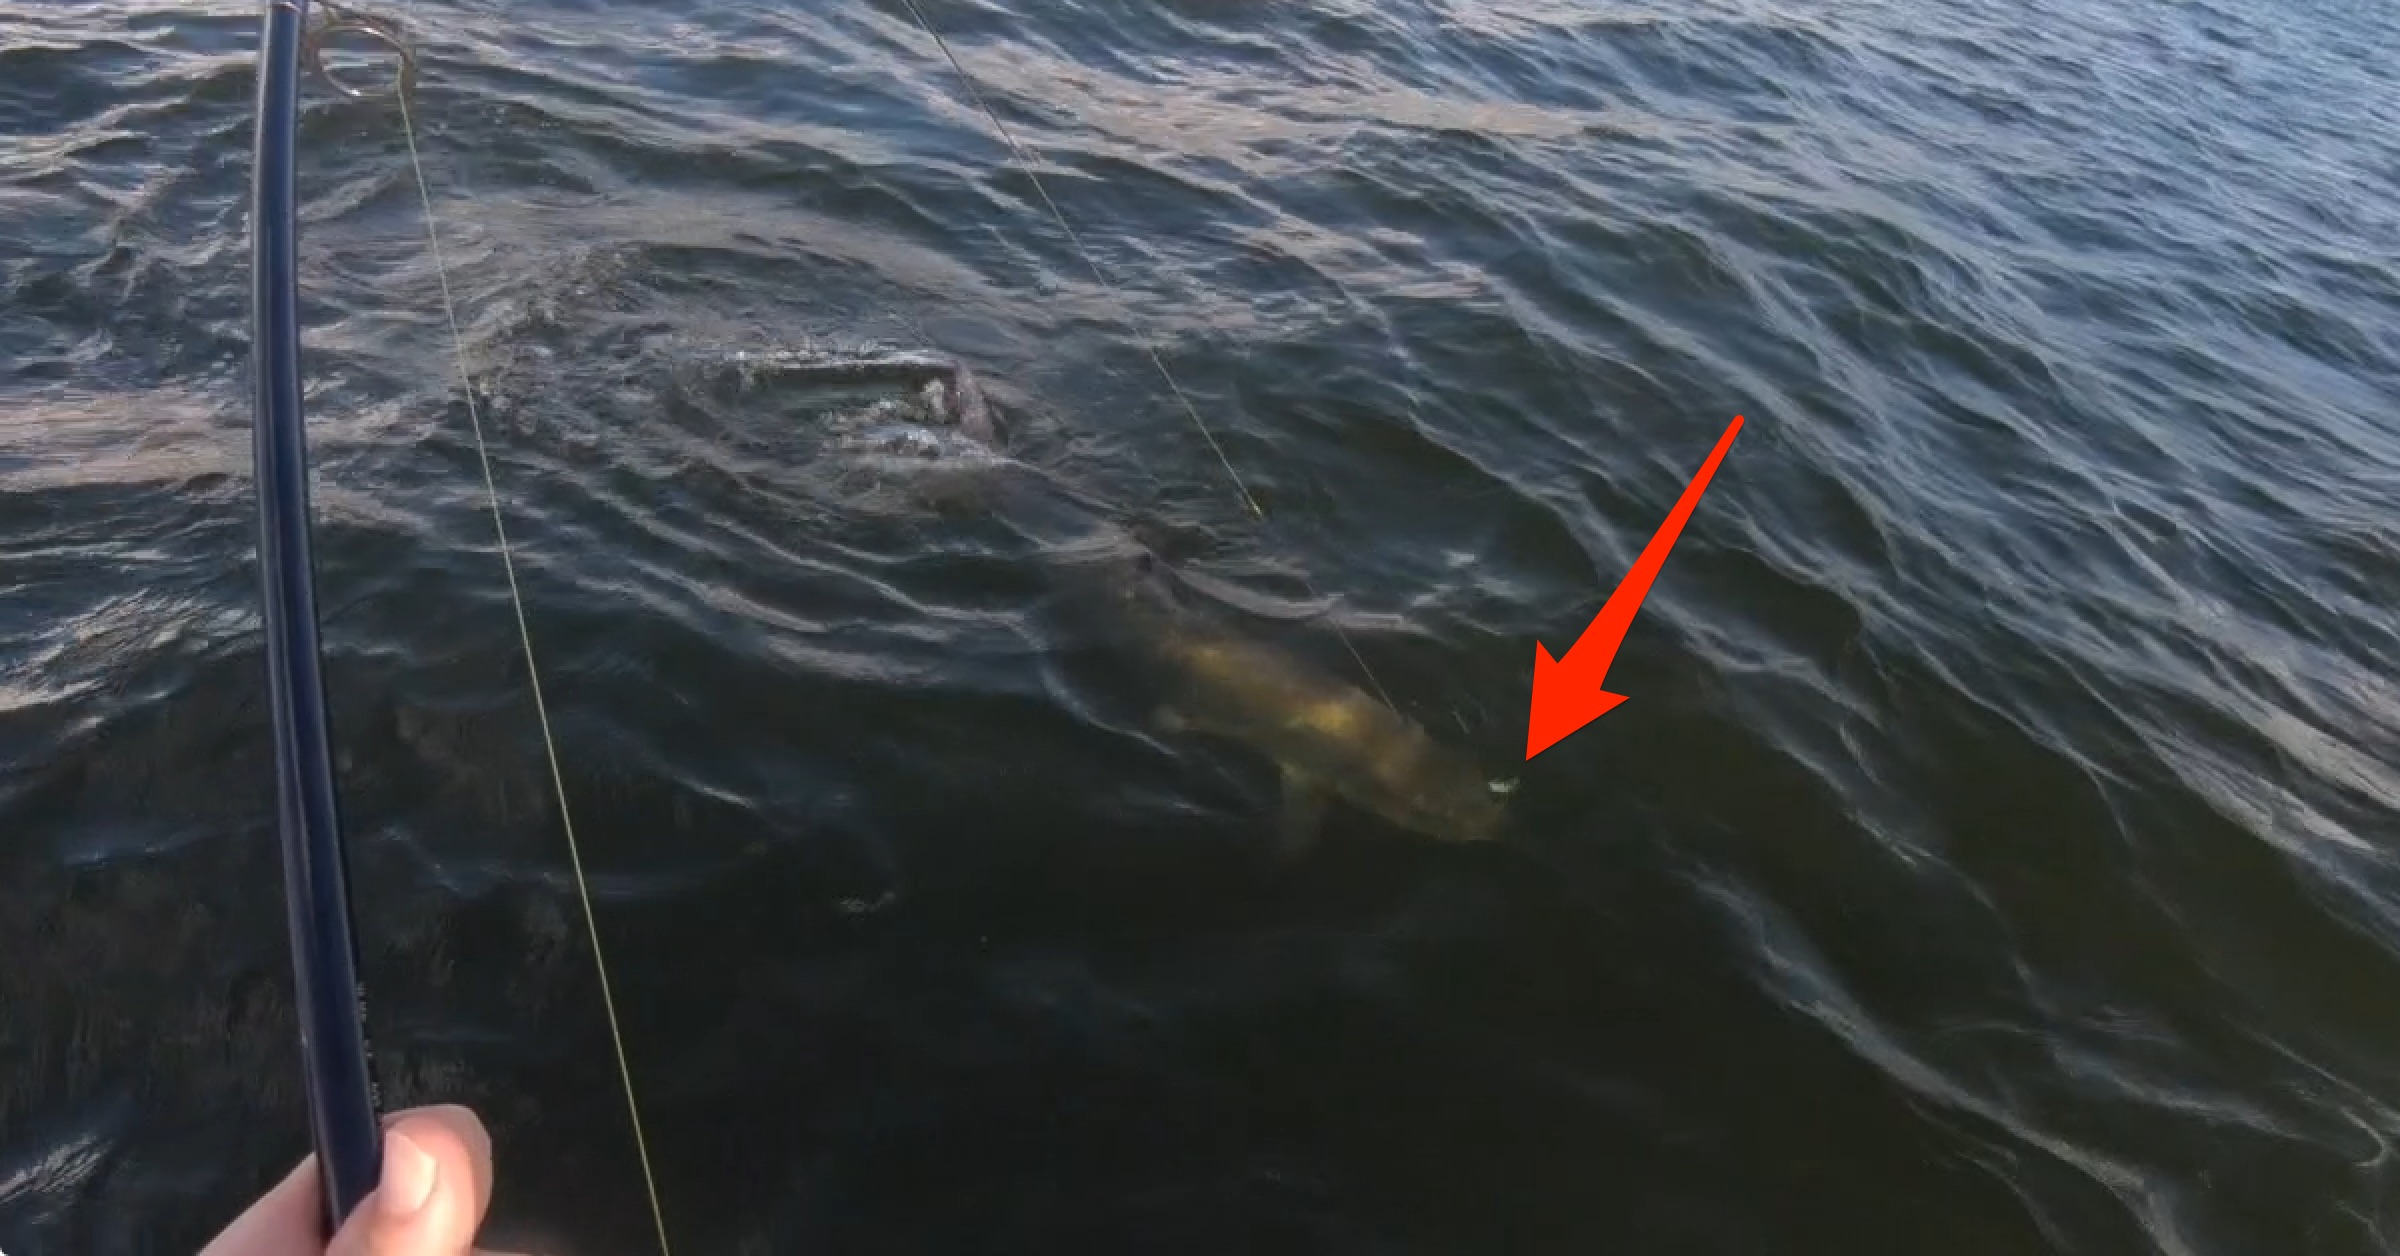 3 Of The Best Lures For Catching Big Tarpon (VIDEO)